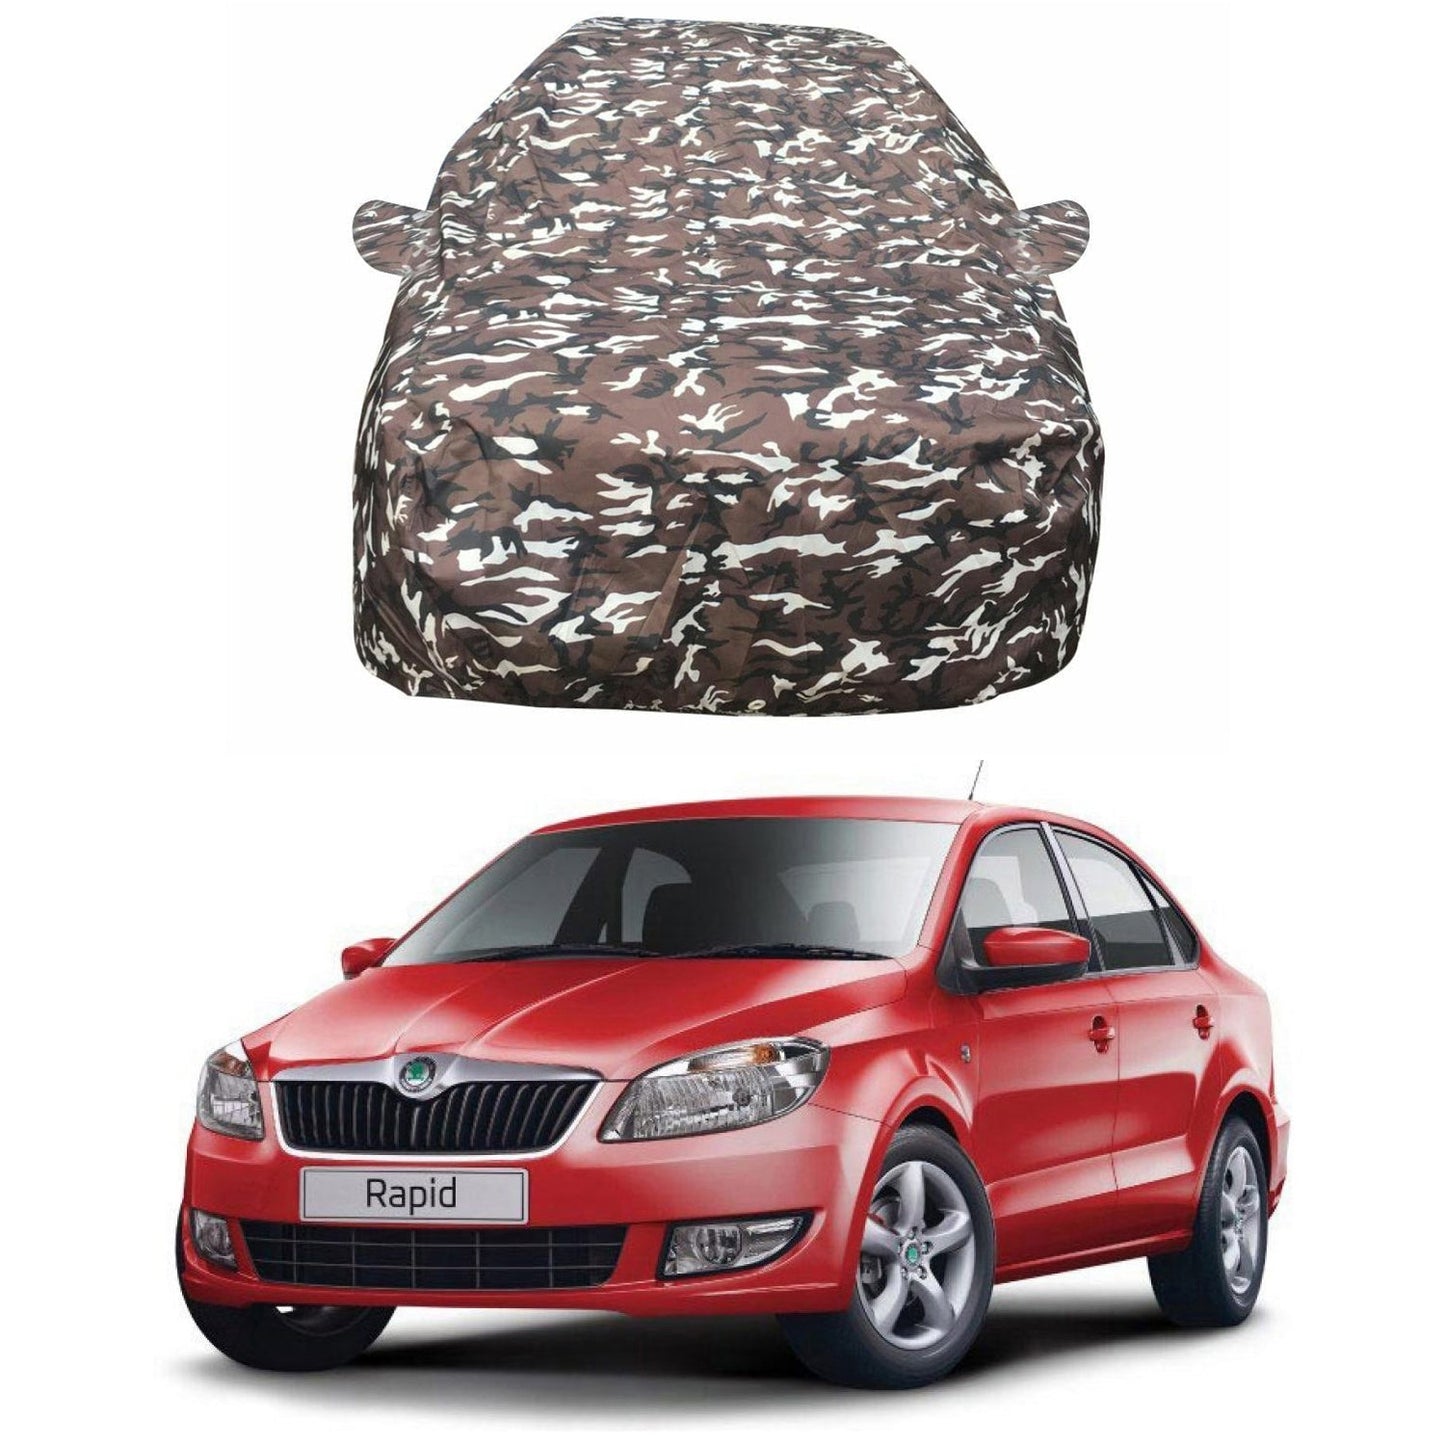 Oshotto Ranger Design Made of 100% Waterproof Fabric Multicolor Car Body Cover with Mirror Pockets For Skoda Rapid